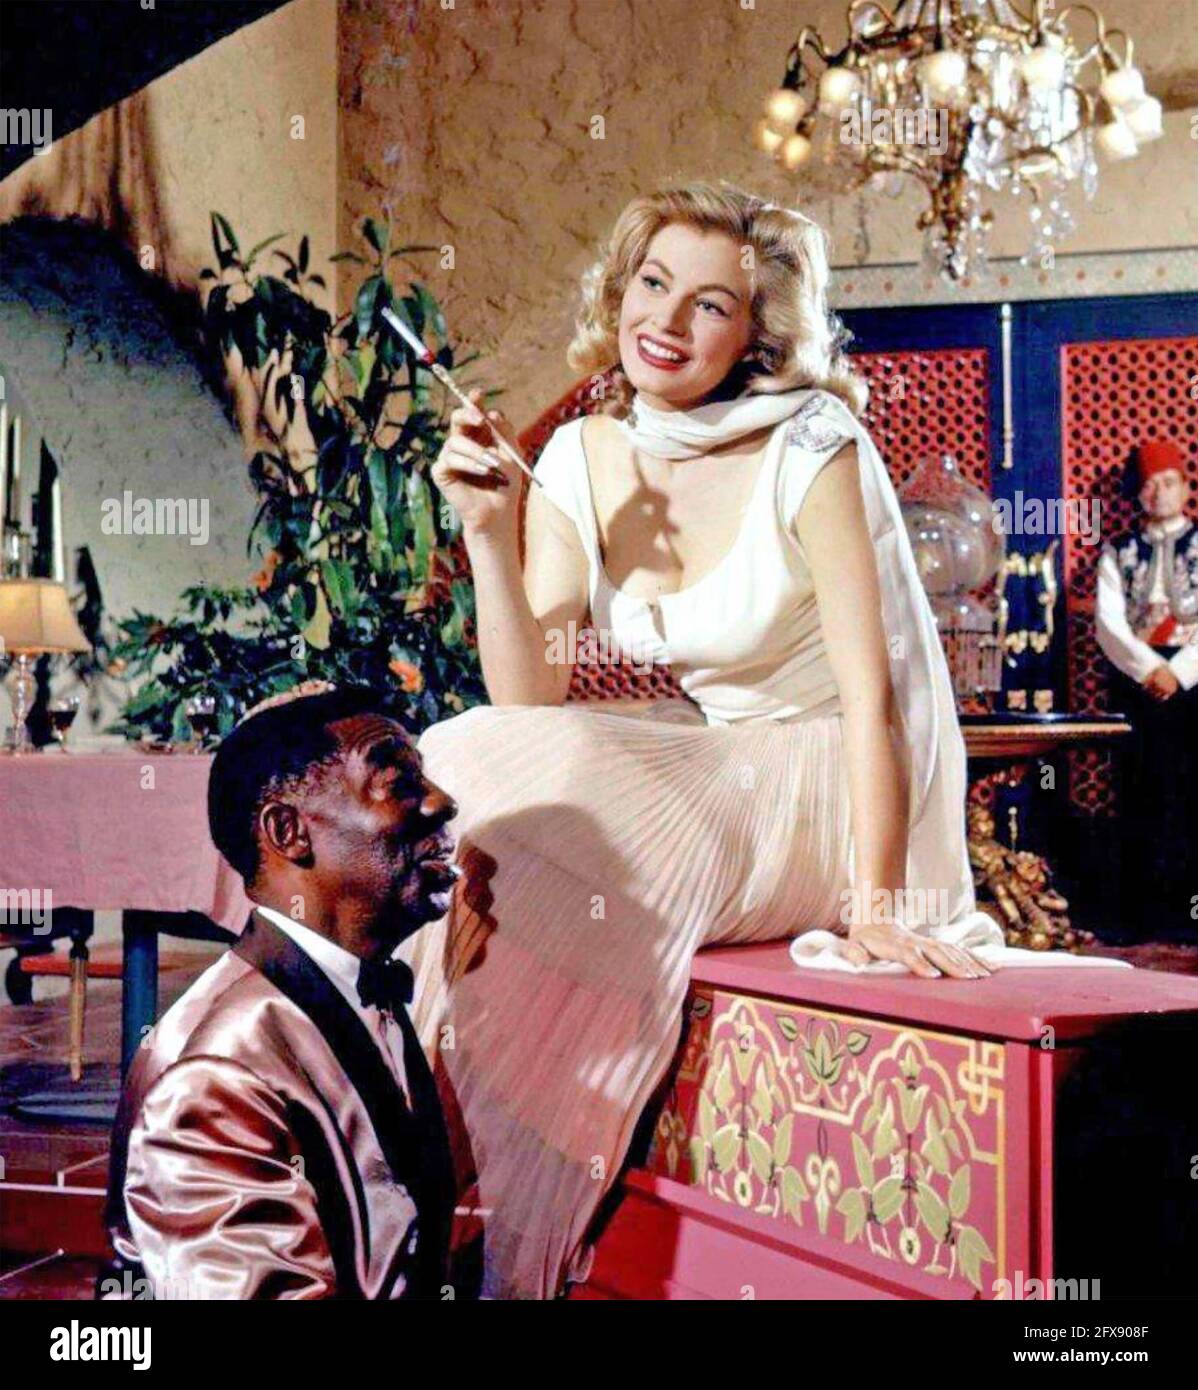 ANITA EKBERG  (1931-2015) Swedish film actress as Katrina in the 1955 Warner Bros. TV version of the film Casablanca with Clarence Muse on piano Stock Photo